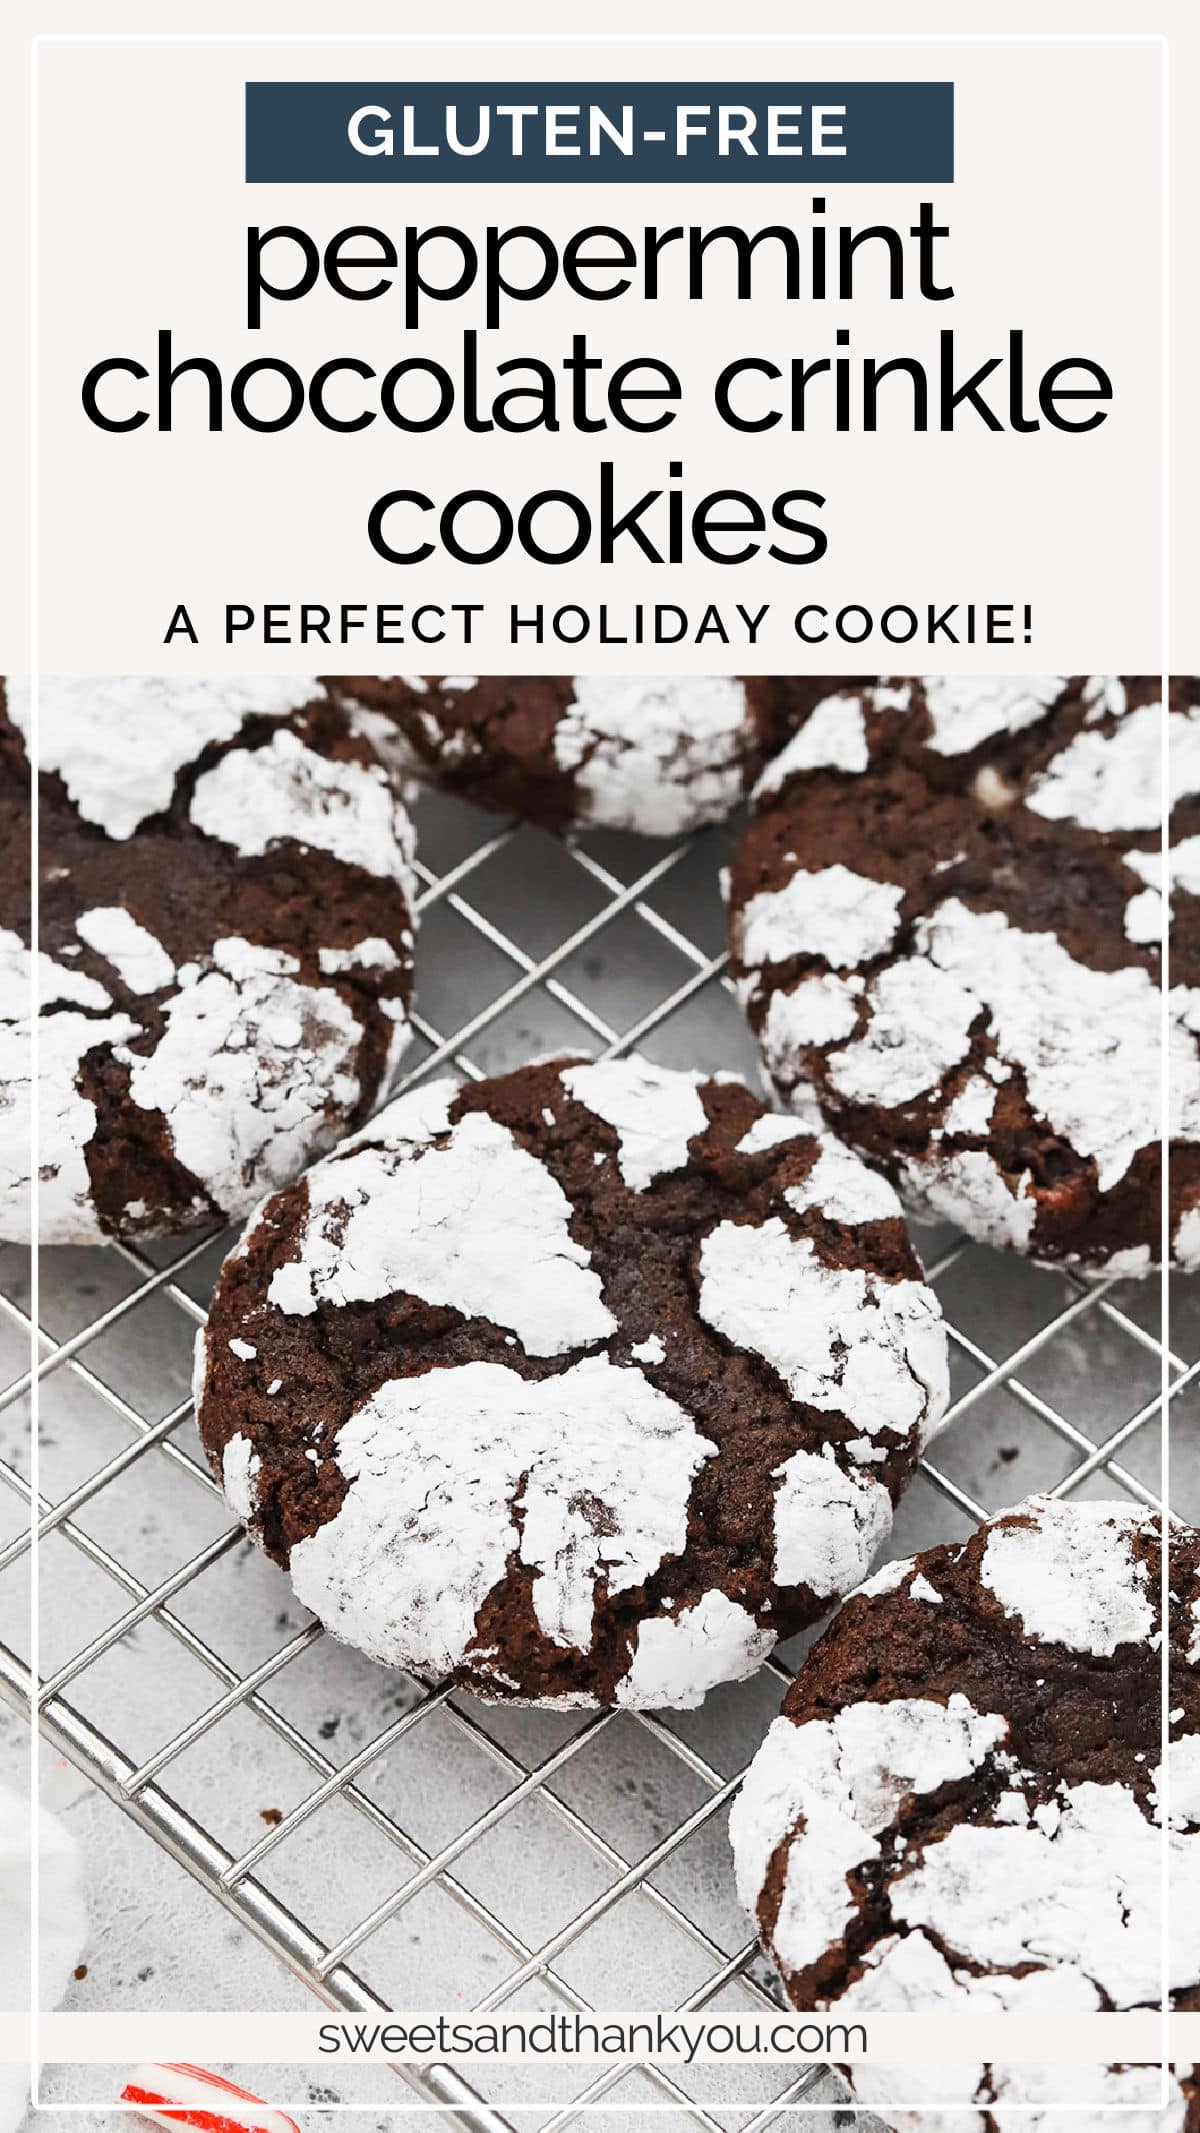 Gluten-Free Peppermint Chocolate Crinkle Cookies - Take best gluten-free chocolate crinkle cookies & give them a minty twist for the holidays! // gluten-free holiday cookies // gluten free peppermint crinkles // gluten free crinkles // gluten-free chocolate cookies // gluten free christmas cookies // gluten free chocolate peppermint crinkles